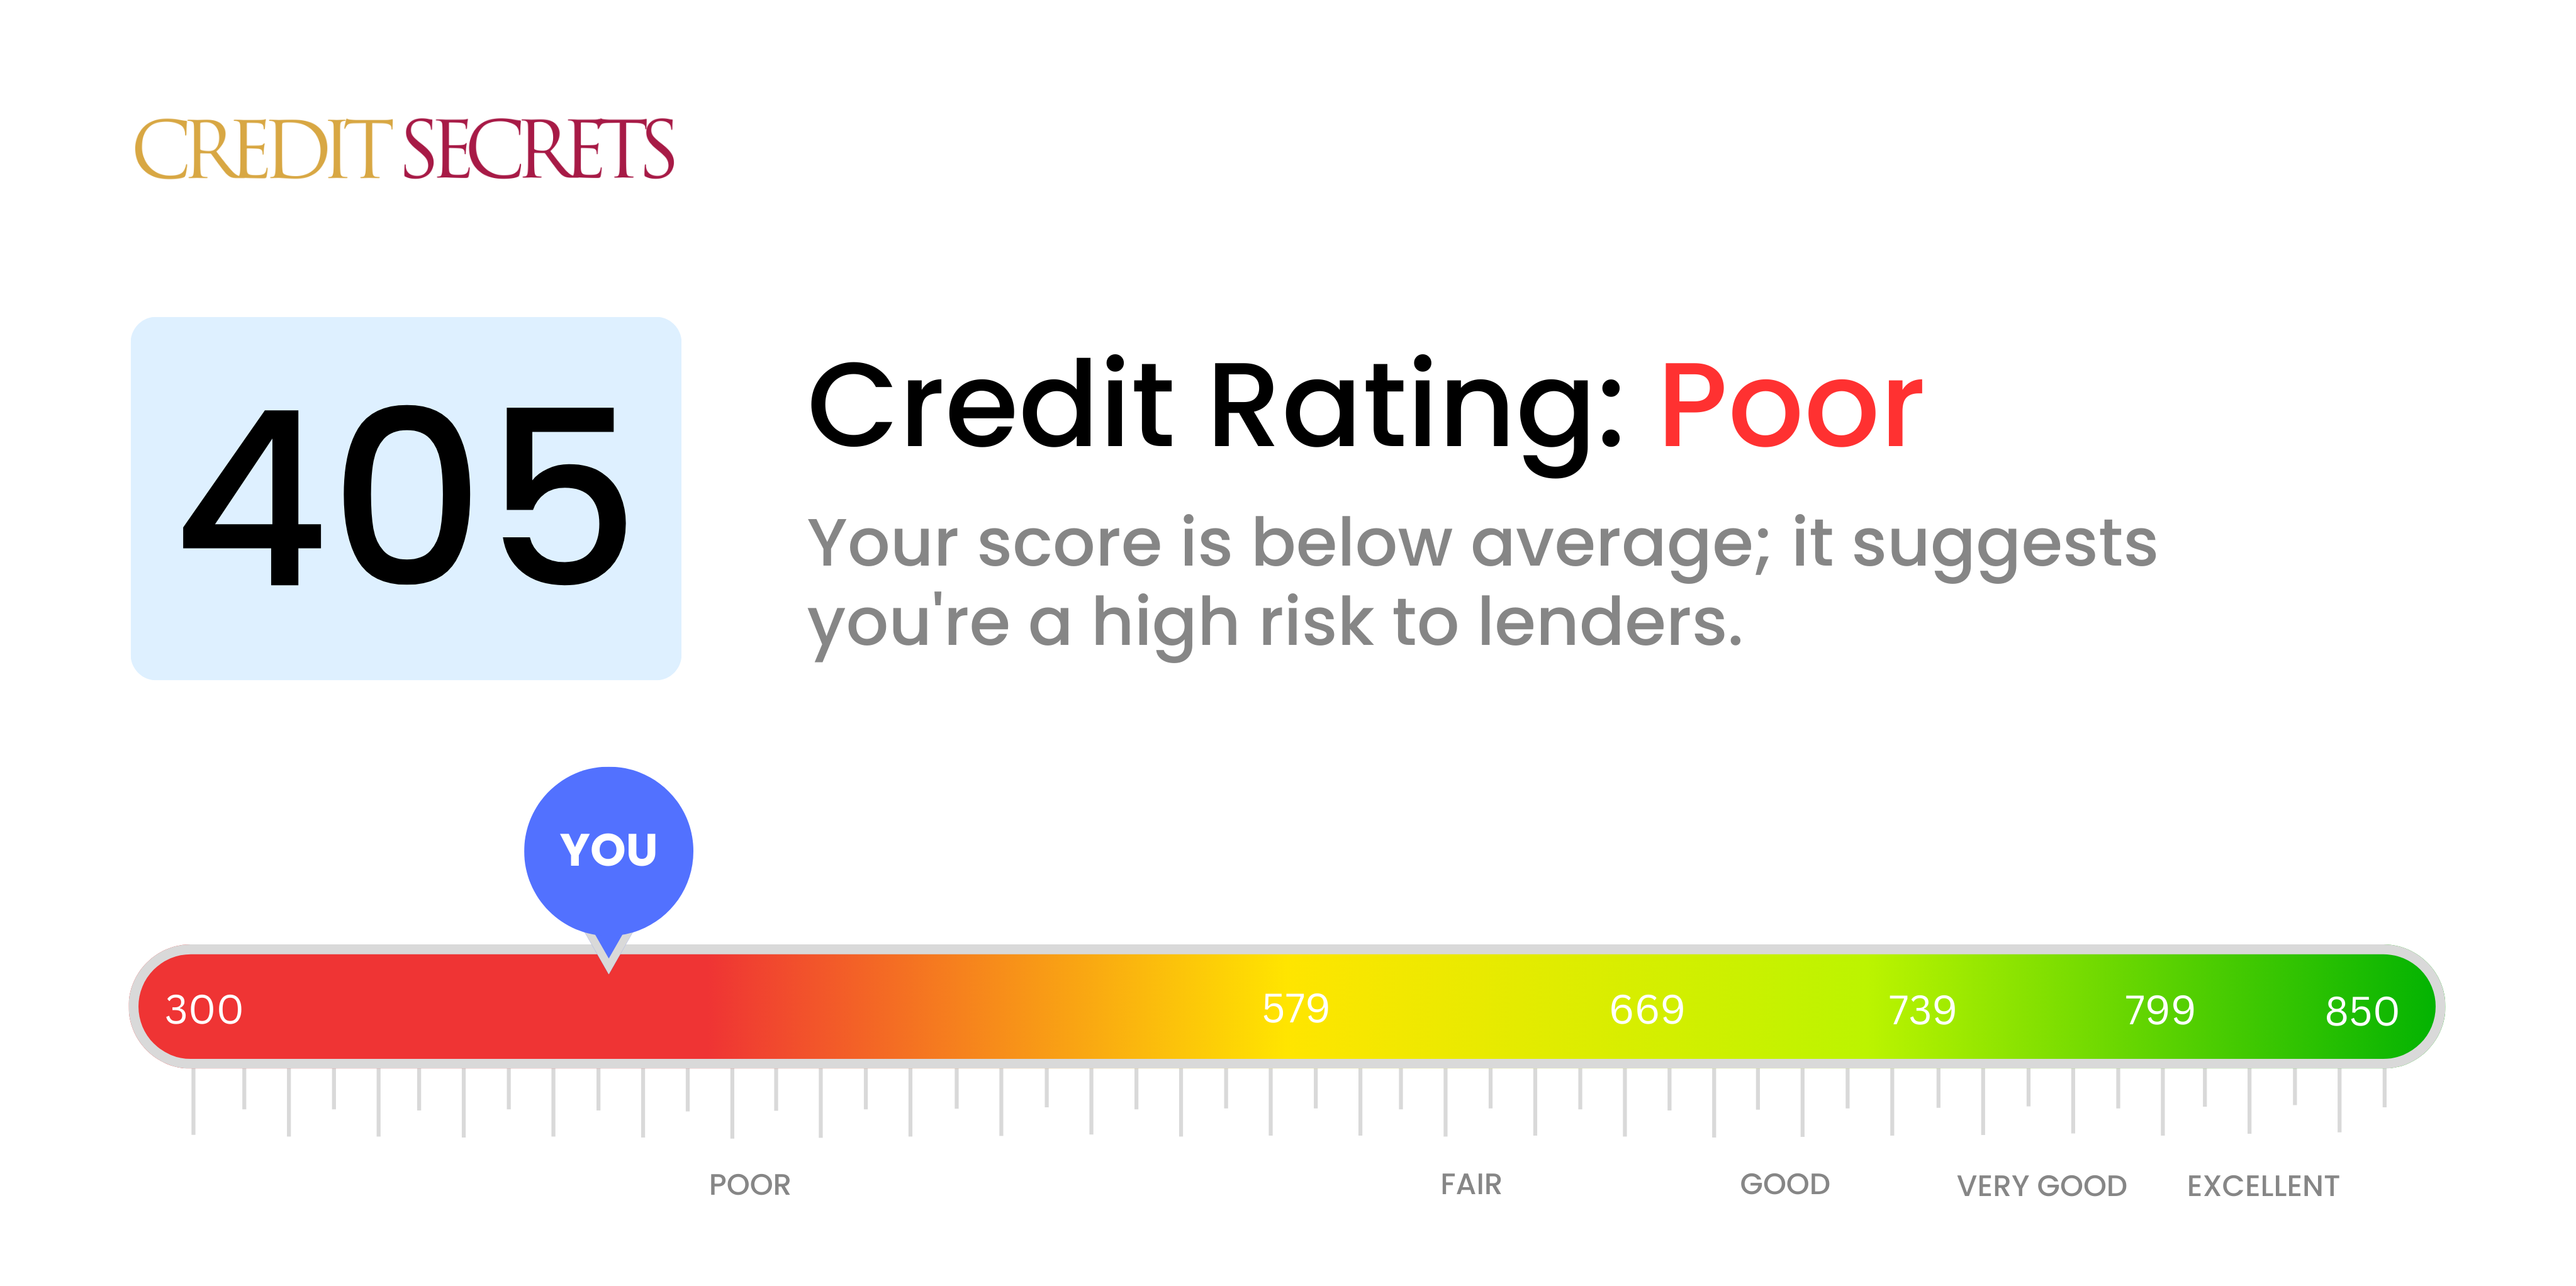 Is 405 a good credit score?